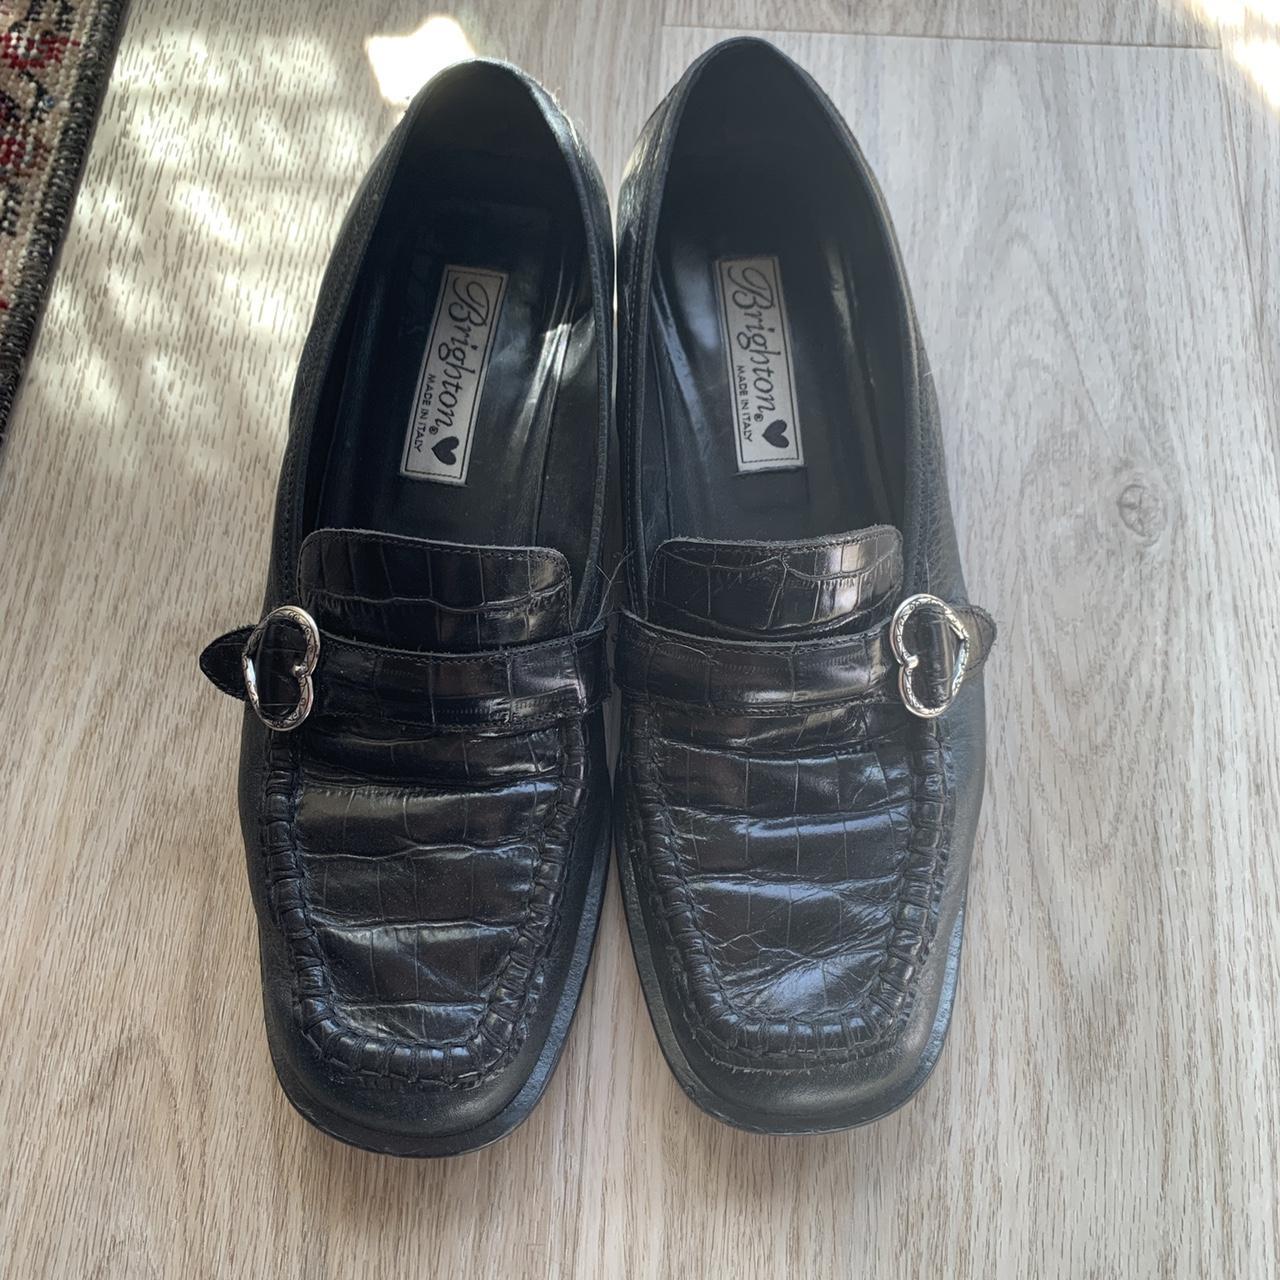 Brighton Women's Black and Silver Loafers (2)